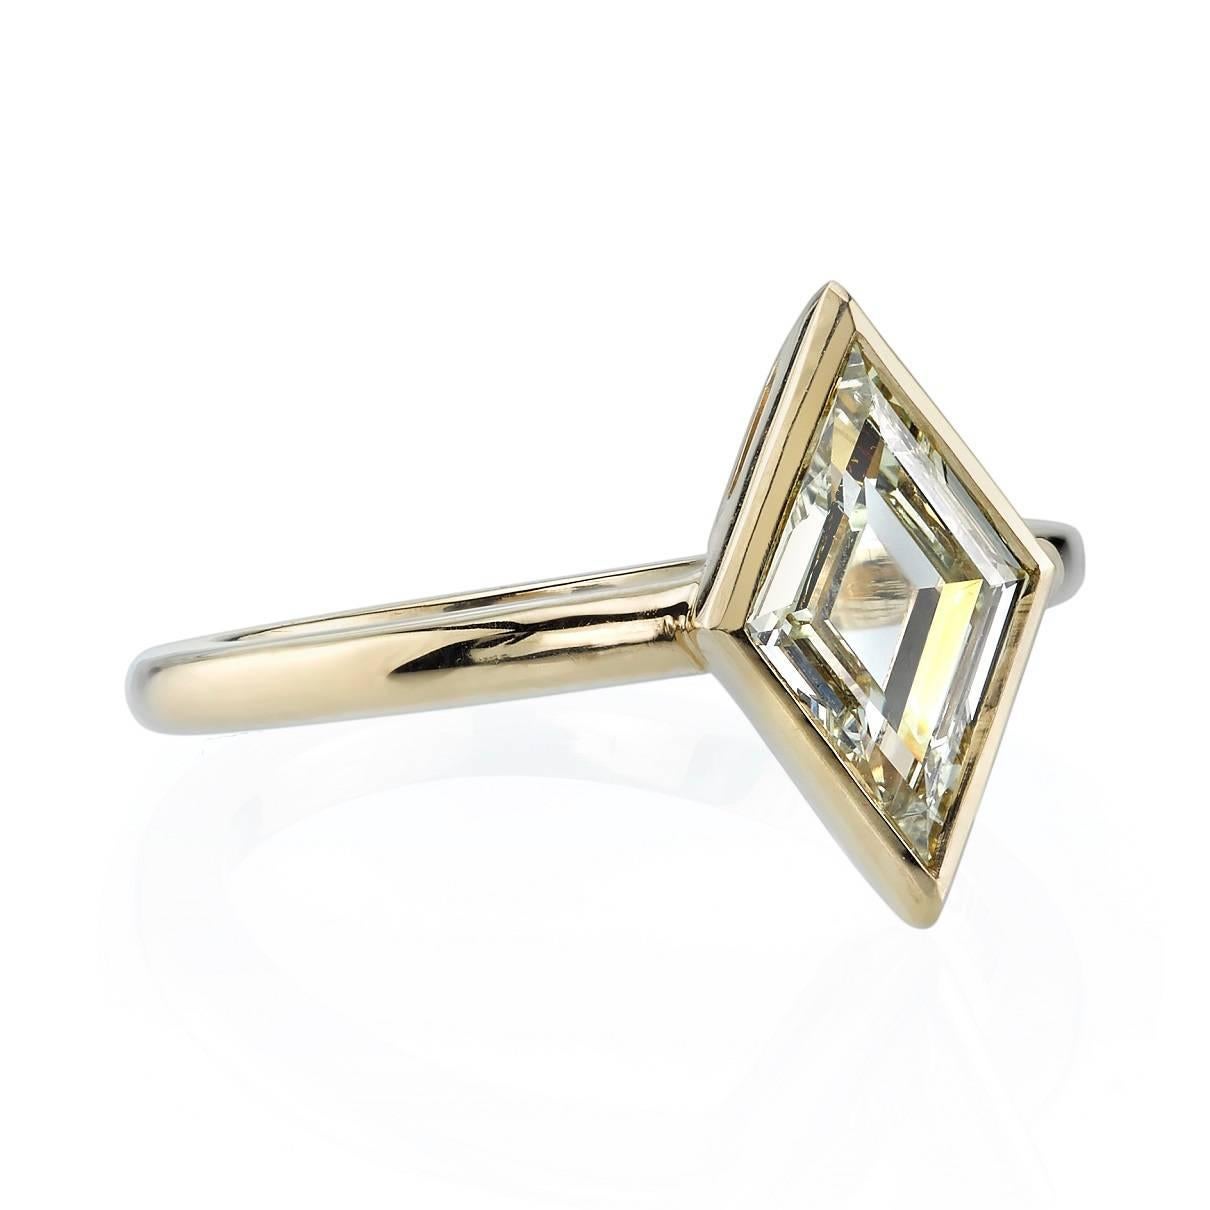 1.03ct OP/VS2 Lozenge cut diamond set in a handcrafted 18k yellow gold mounting.  